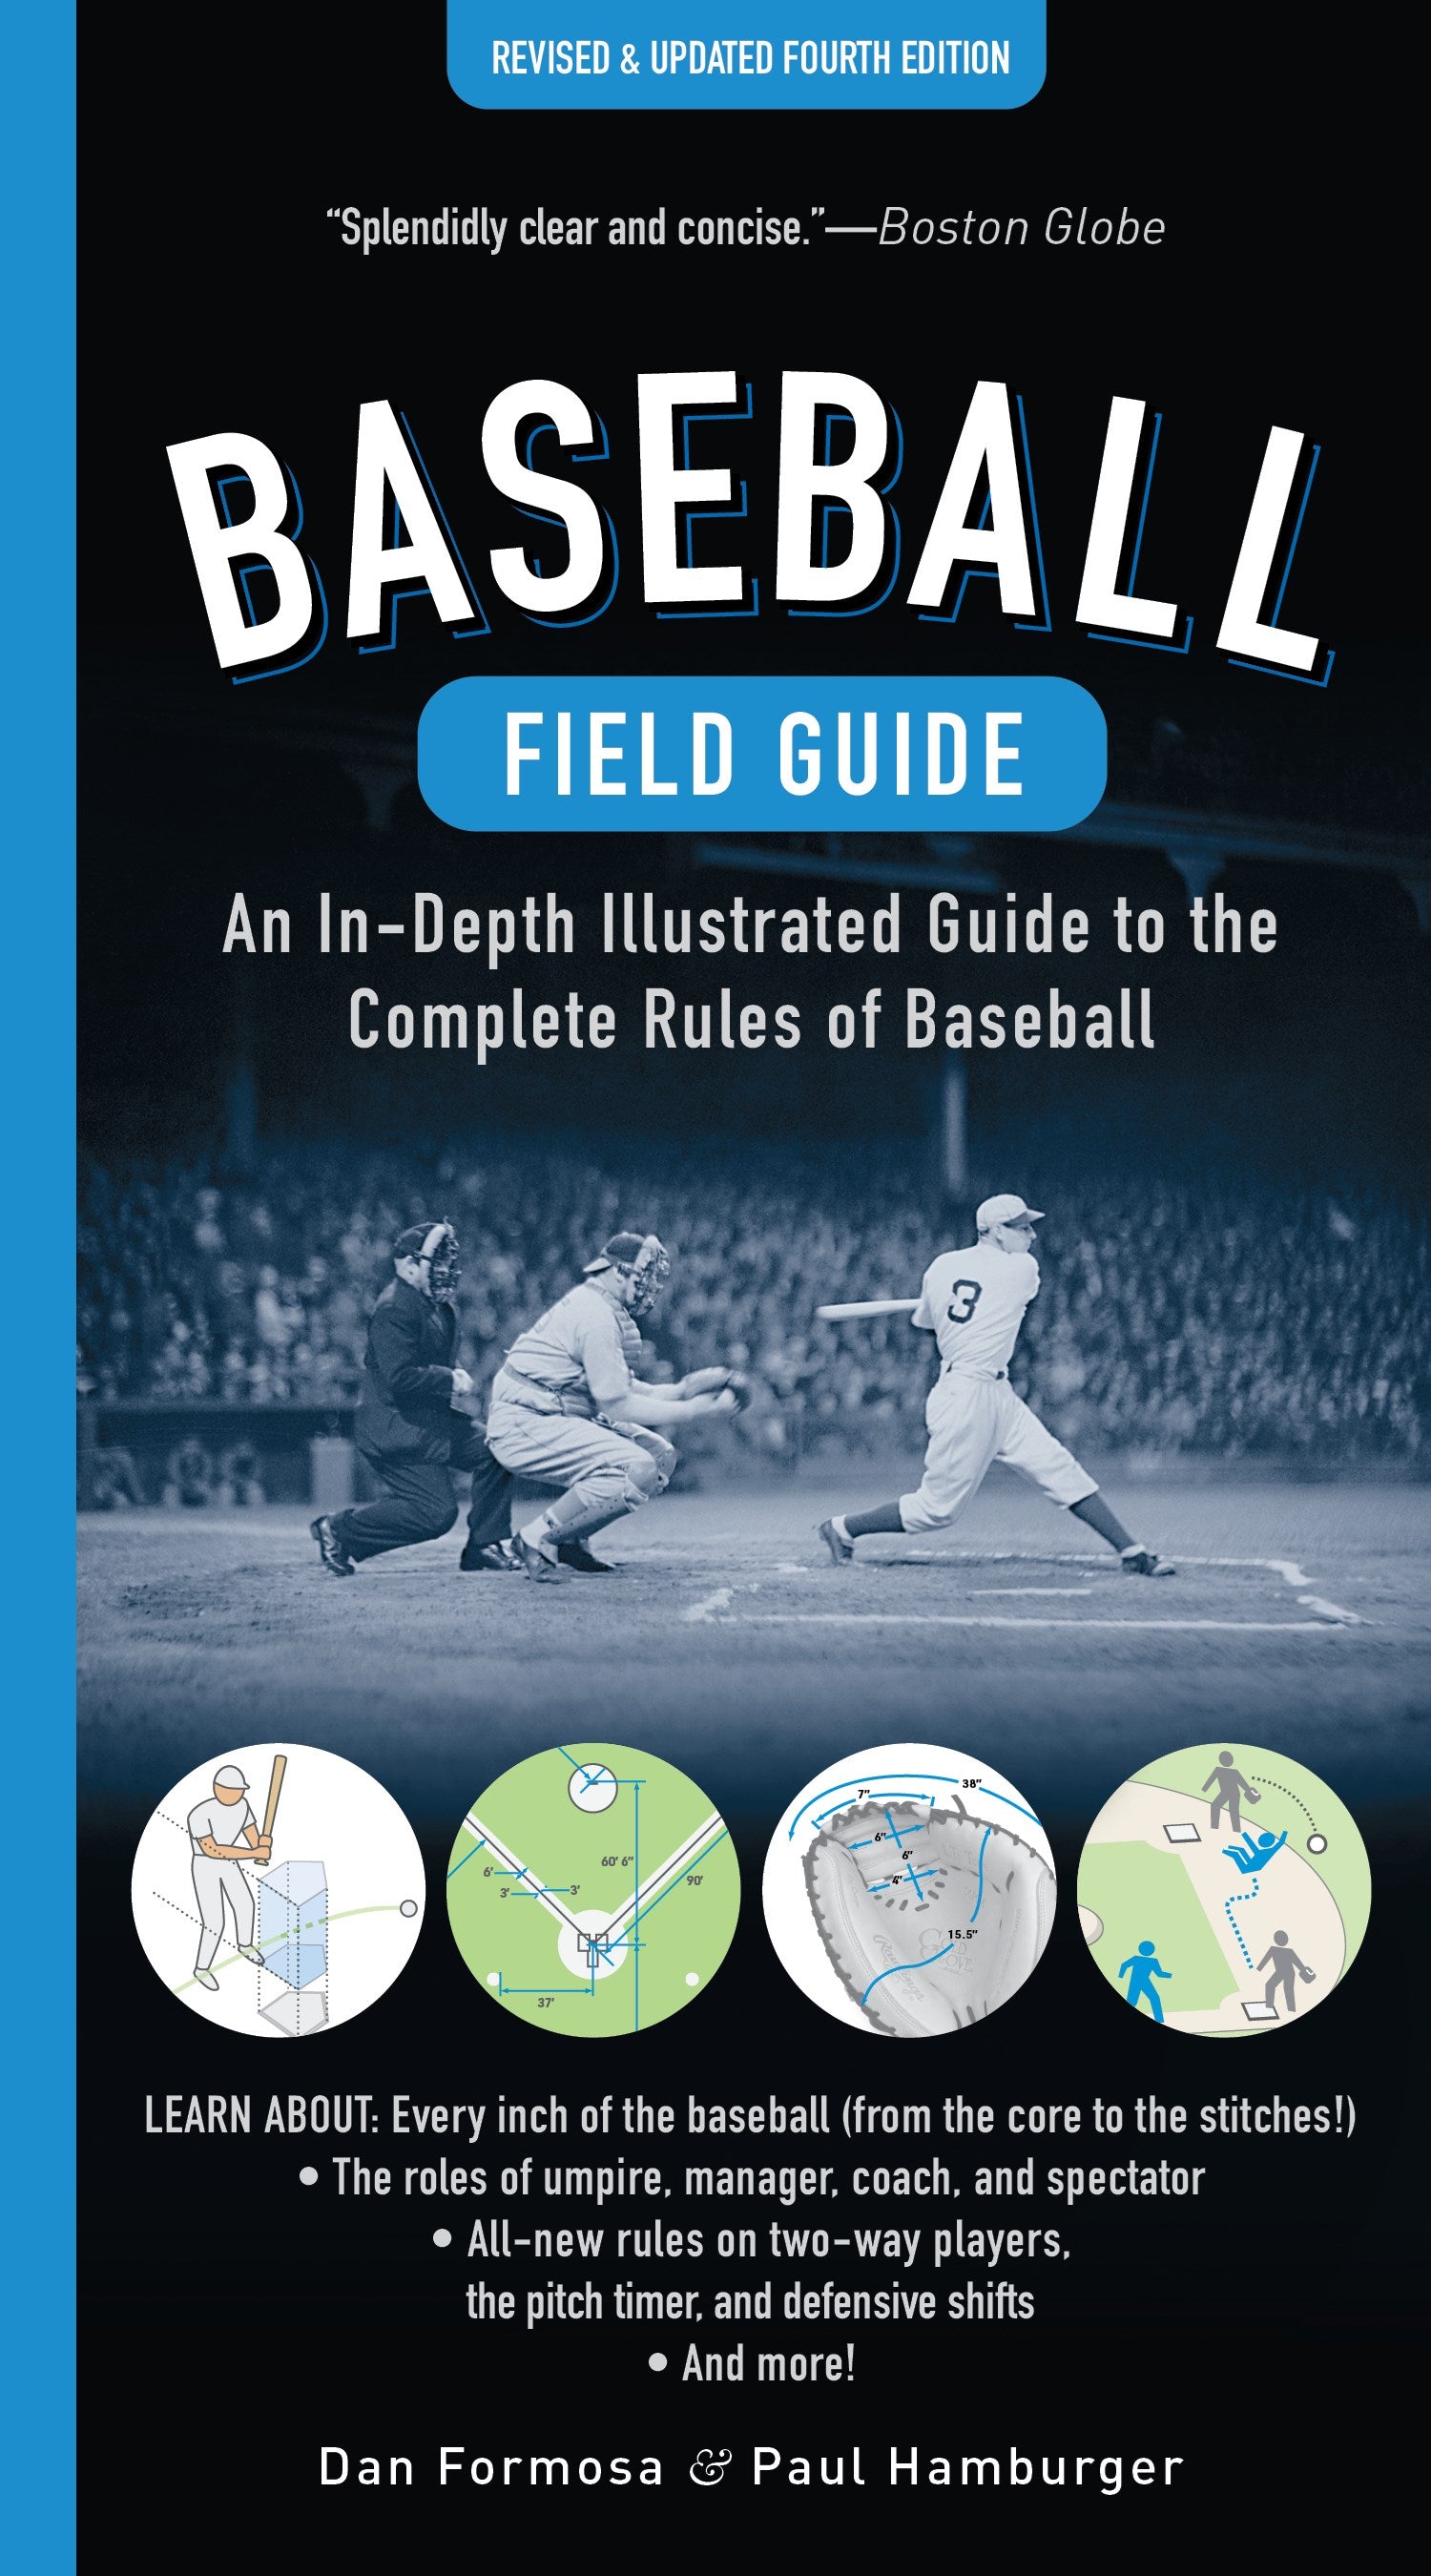 Baseball Field Guide, Fourth Edition: An In-Depth Illustrated Guide to the Complete Rules of Baseball (4th Edition)